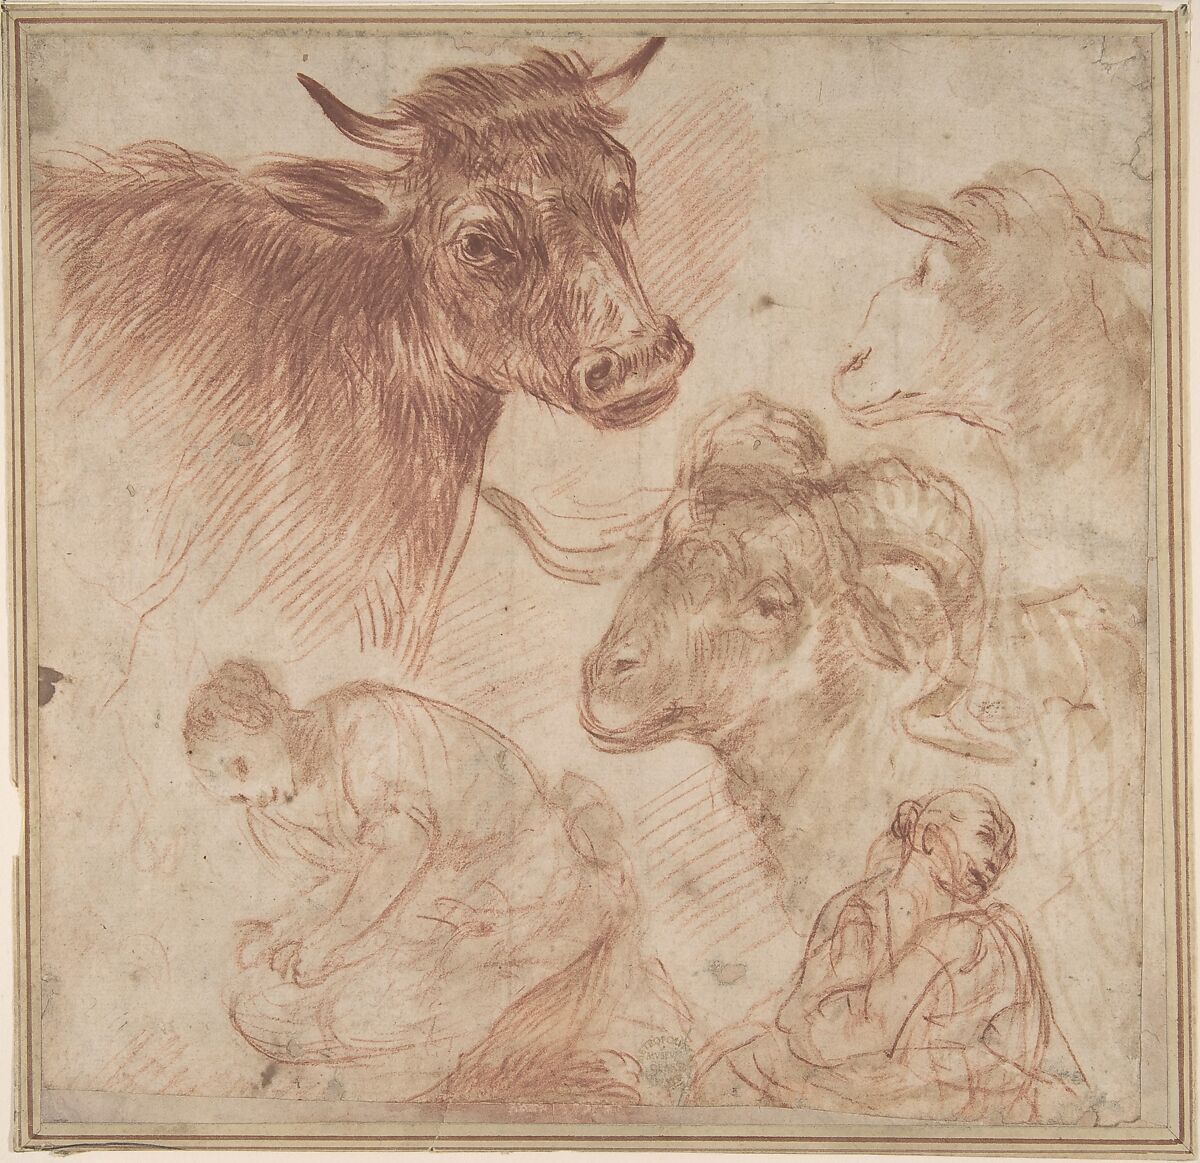 Studies of Animal Heads and Figures, Anonymous, Italian, Roman-Bolognese, 17th century, Red chalk, brush and brown wash on light brown paper 